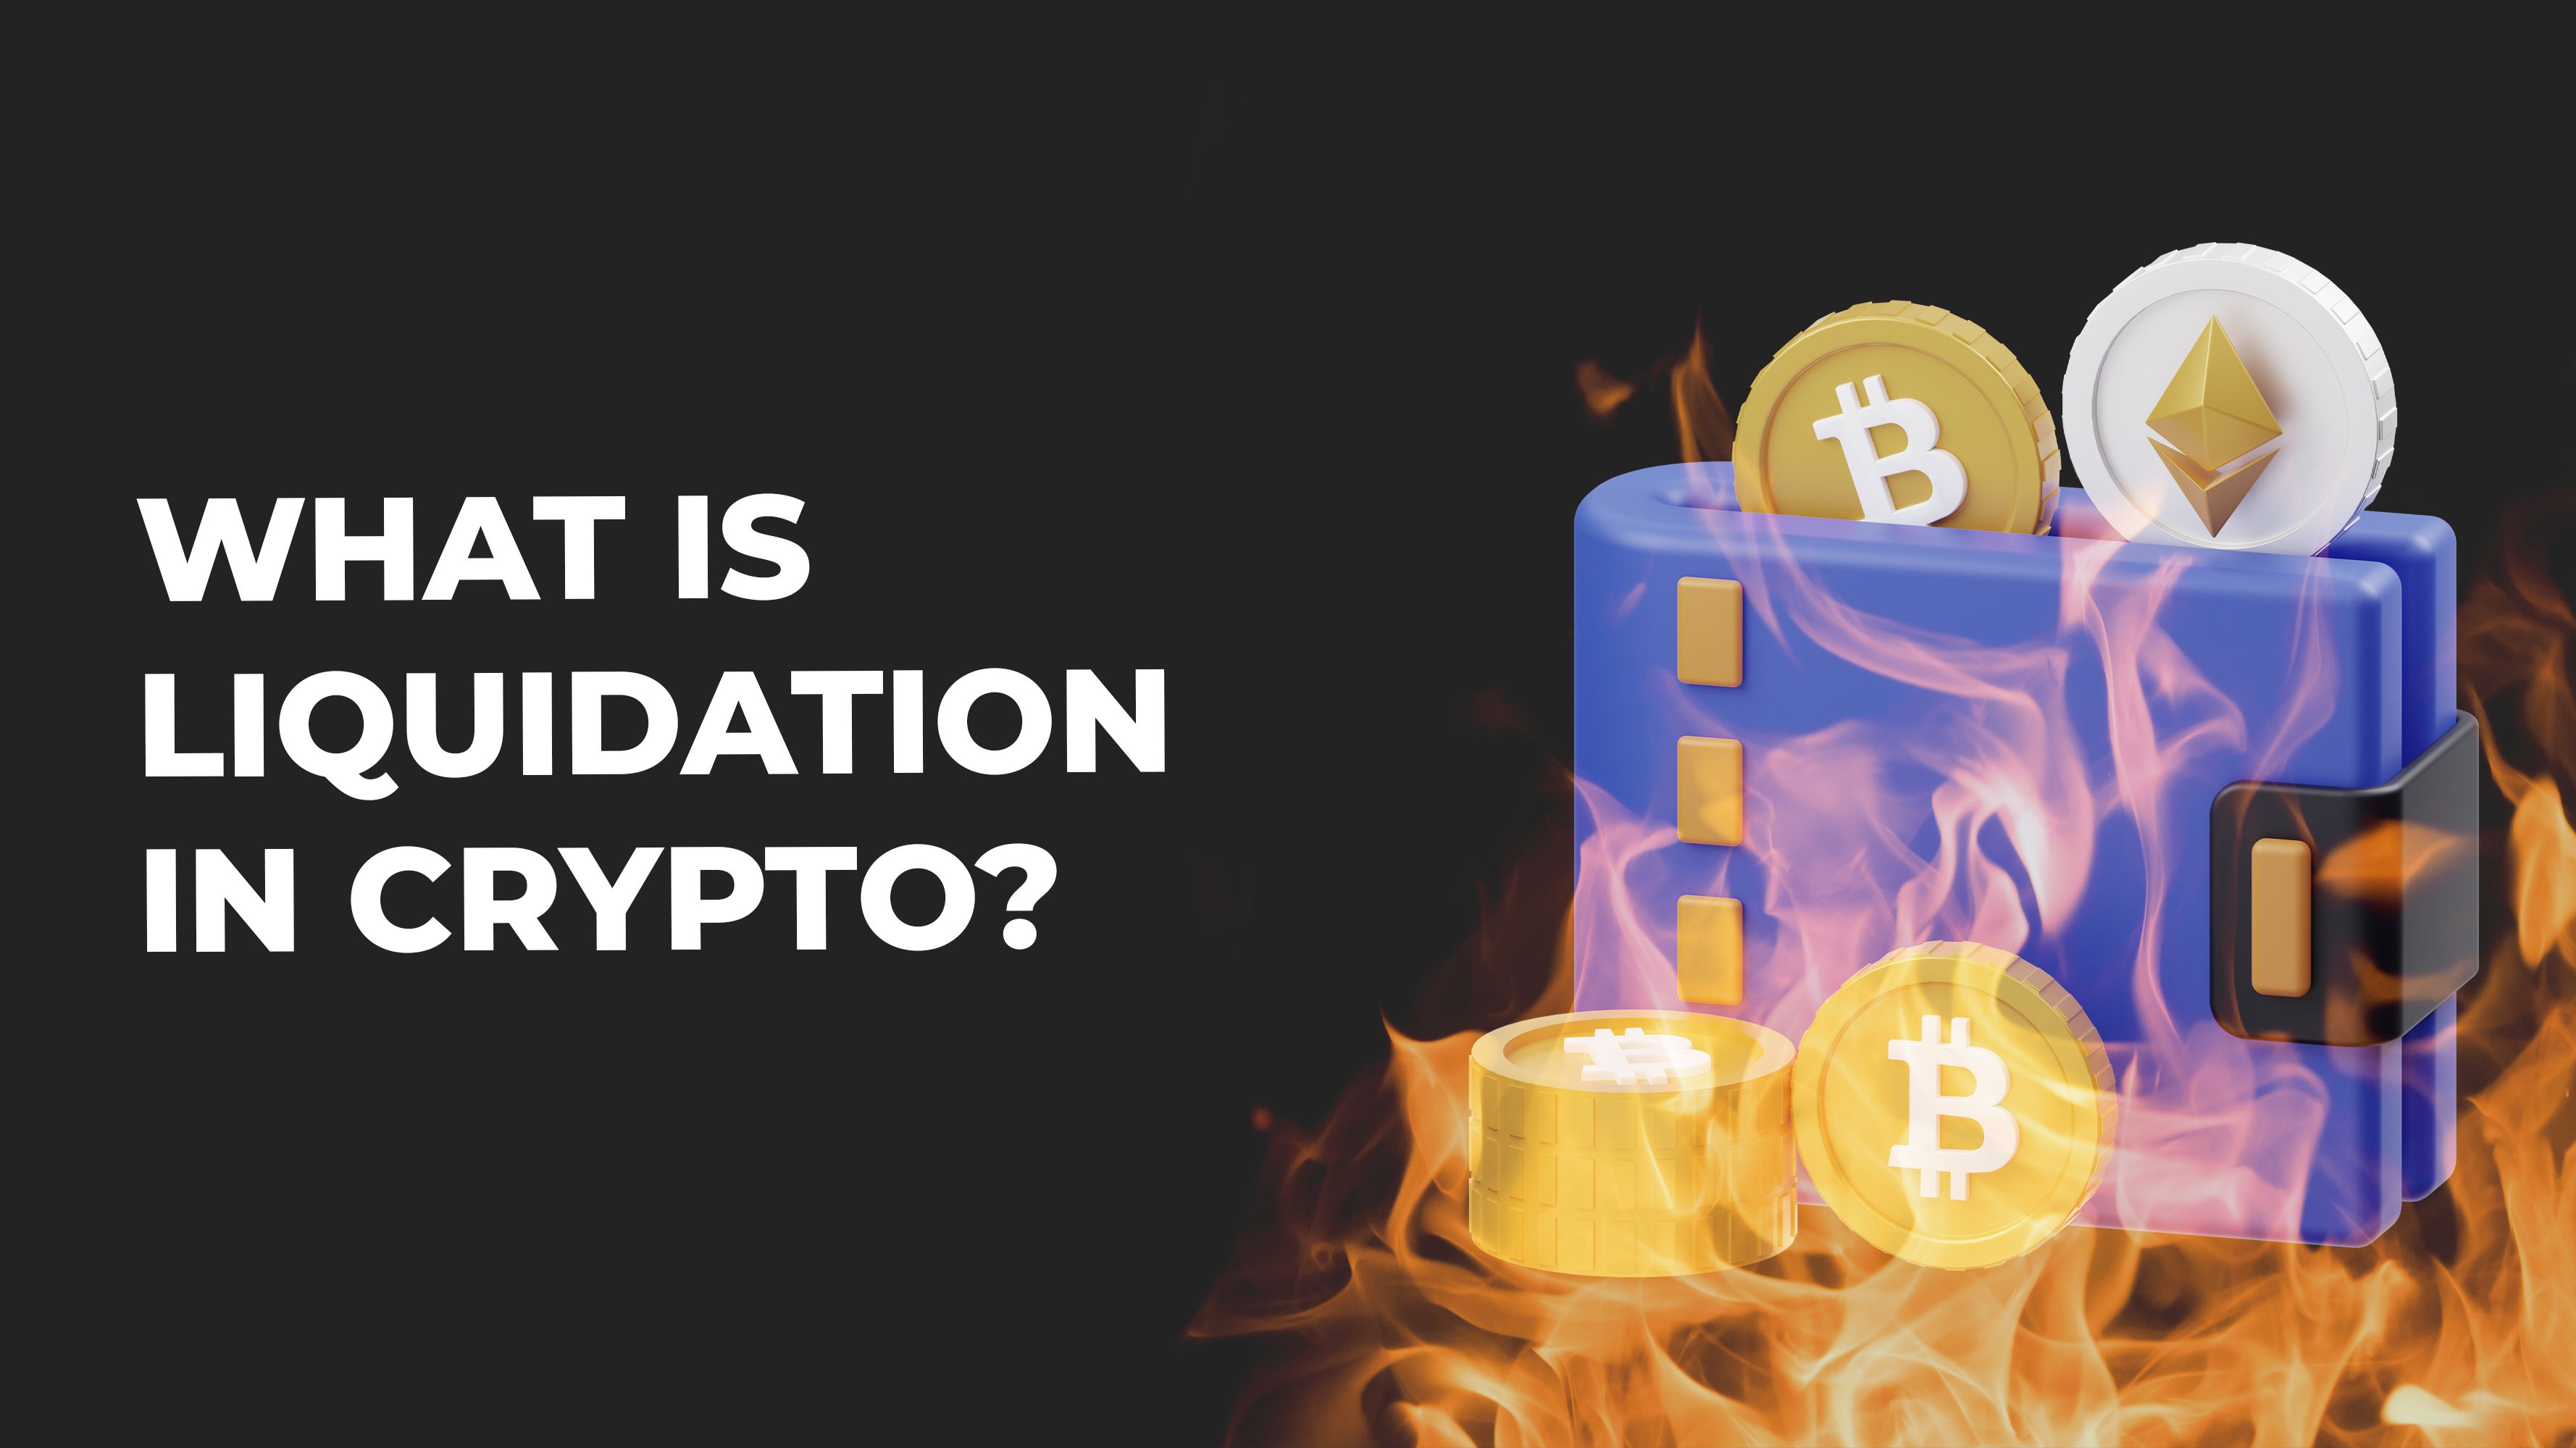 What is liquidation in cryptocurrency? How to use liquidation to buy crypto at a discount?